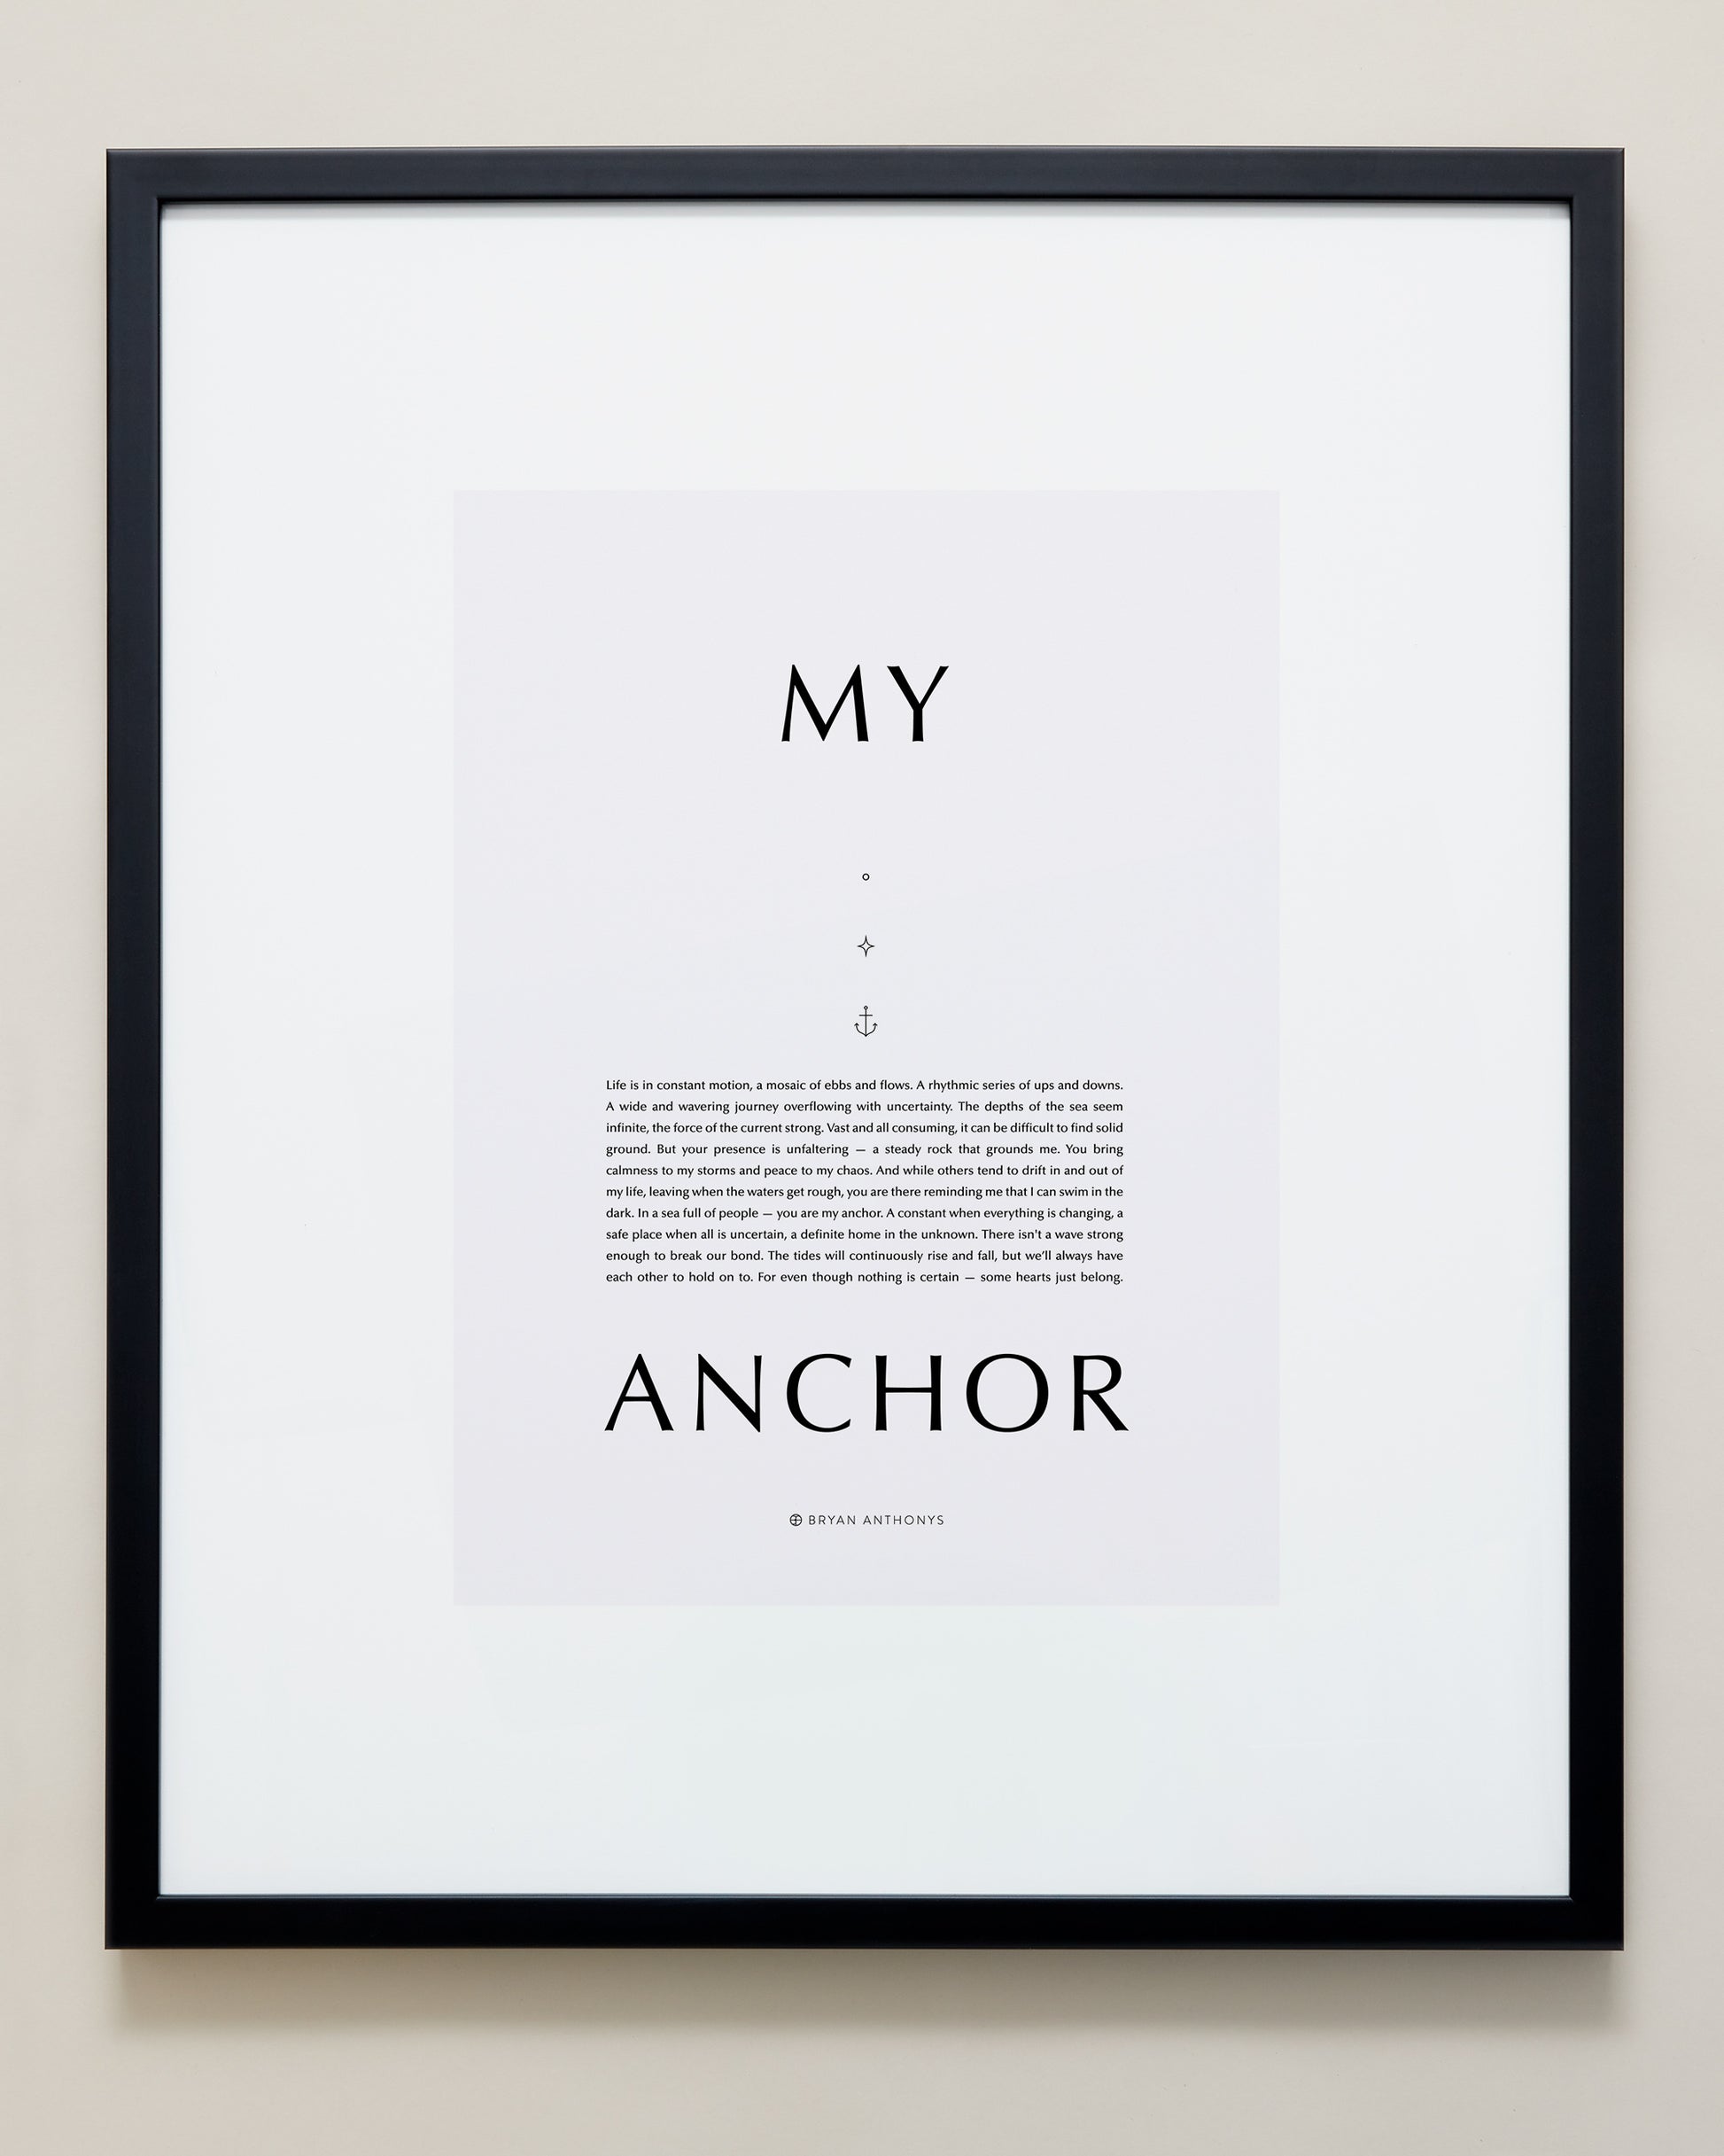 Bryan Anthonys Home Decor Purposeful Prints My Anchor Iconic Framed Print Gray Art With Black Frame 20x24